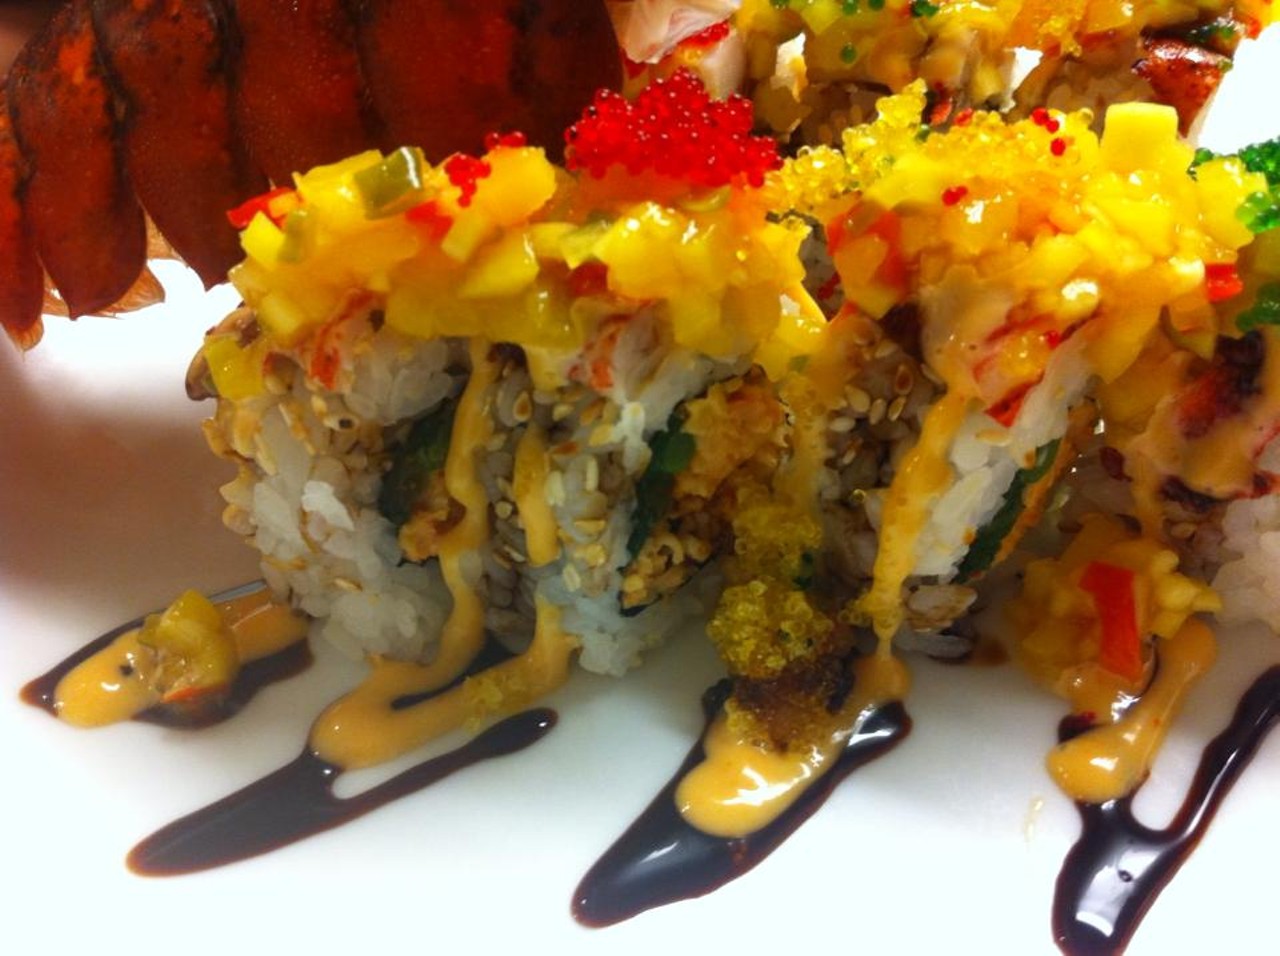 Chef Scott Kim brings real deal sushi to Shaker Square. Our pick is the Green Dragon Roll, Alaskan king crab,eel and tempura crunch topped with avocado and unagi sauce.